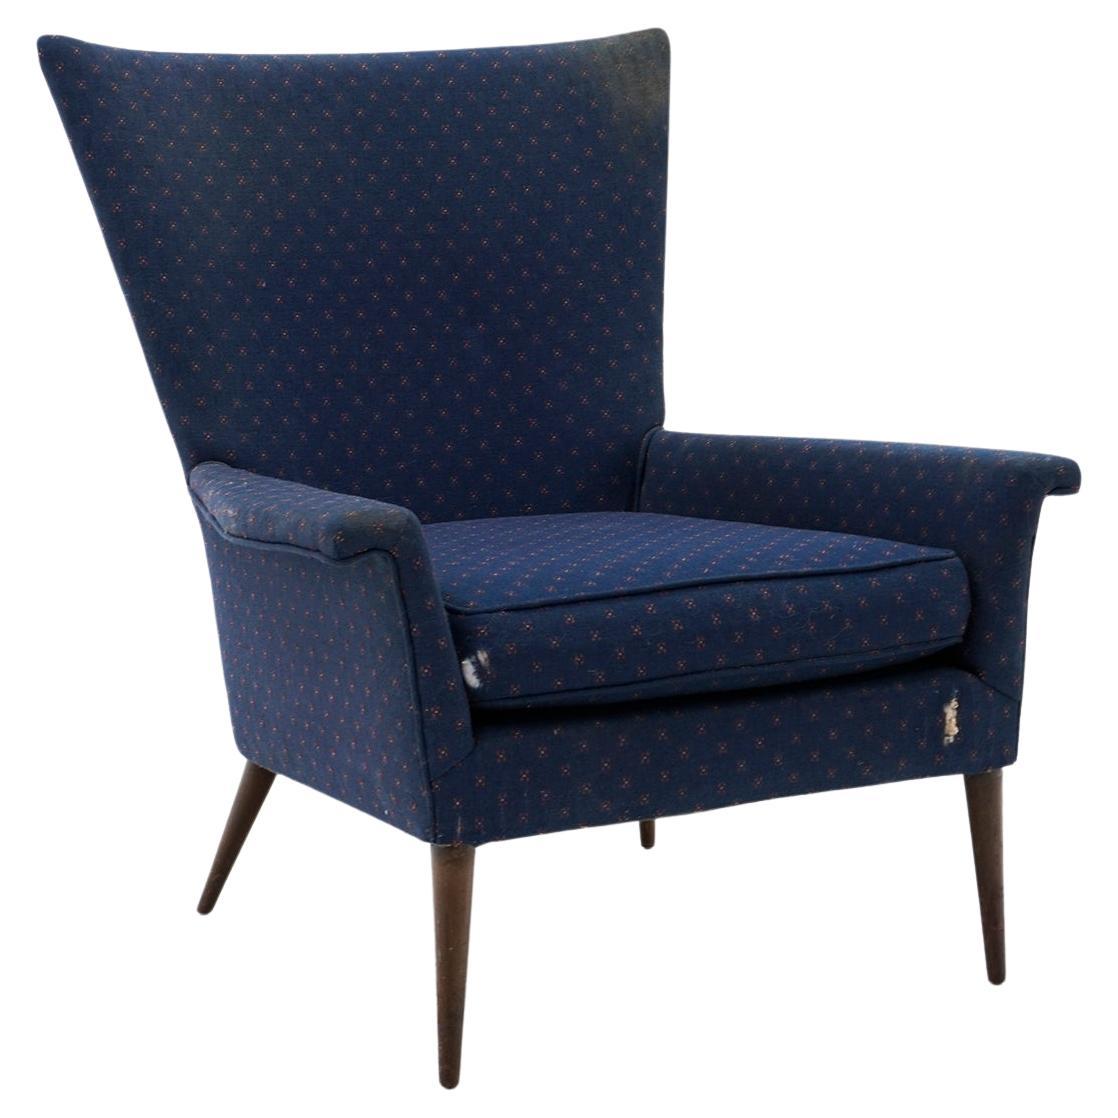 Paul McCobb "Tub" High Back Lounge Chair Model 3045, Priced Low for Reupholstery For Sale